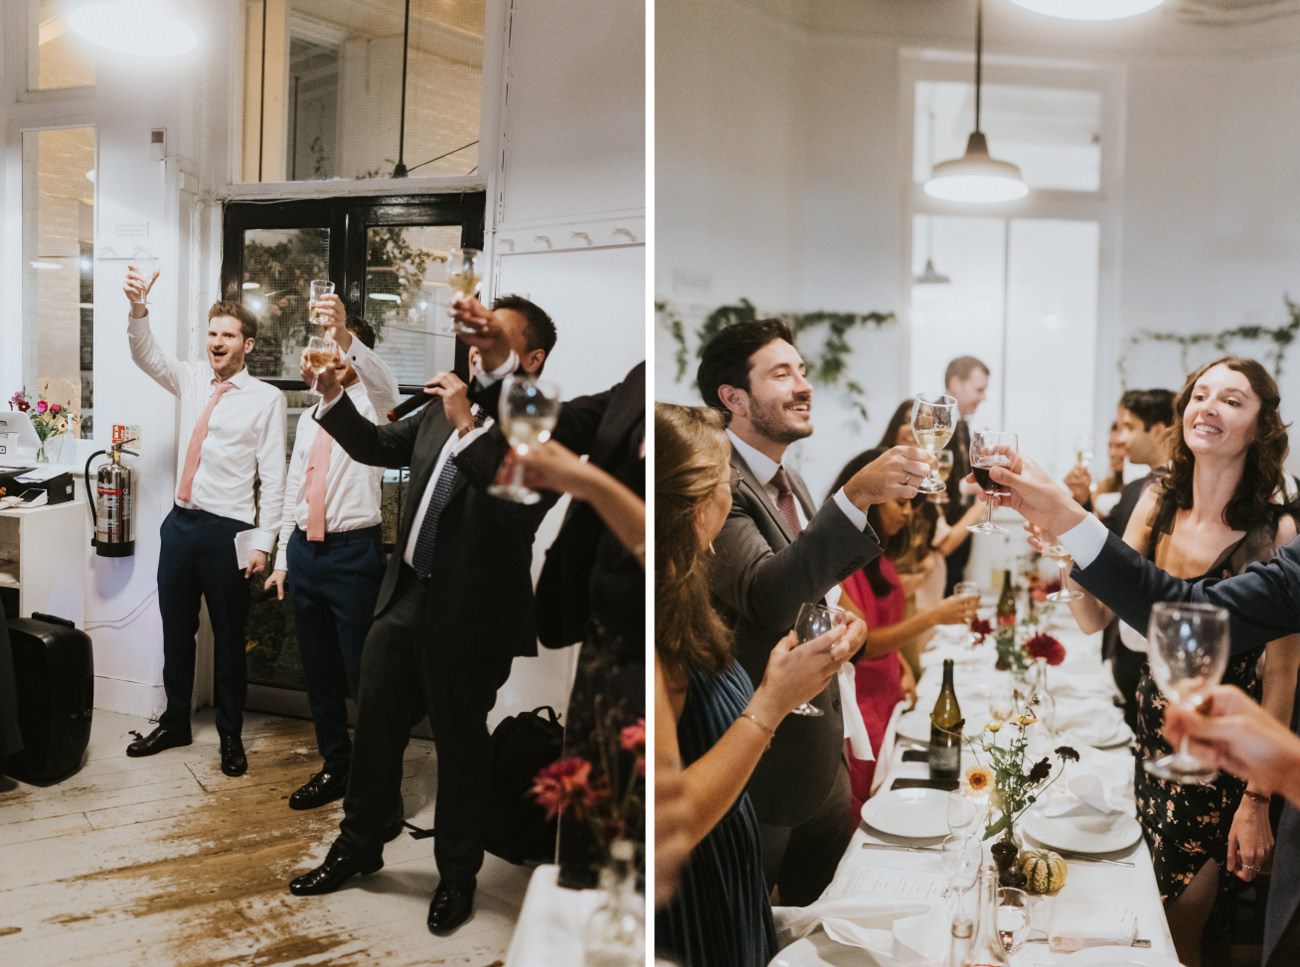 Guests toast the bride and groom in a laughter filled room. 